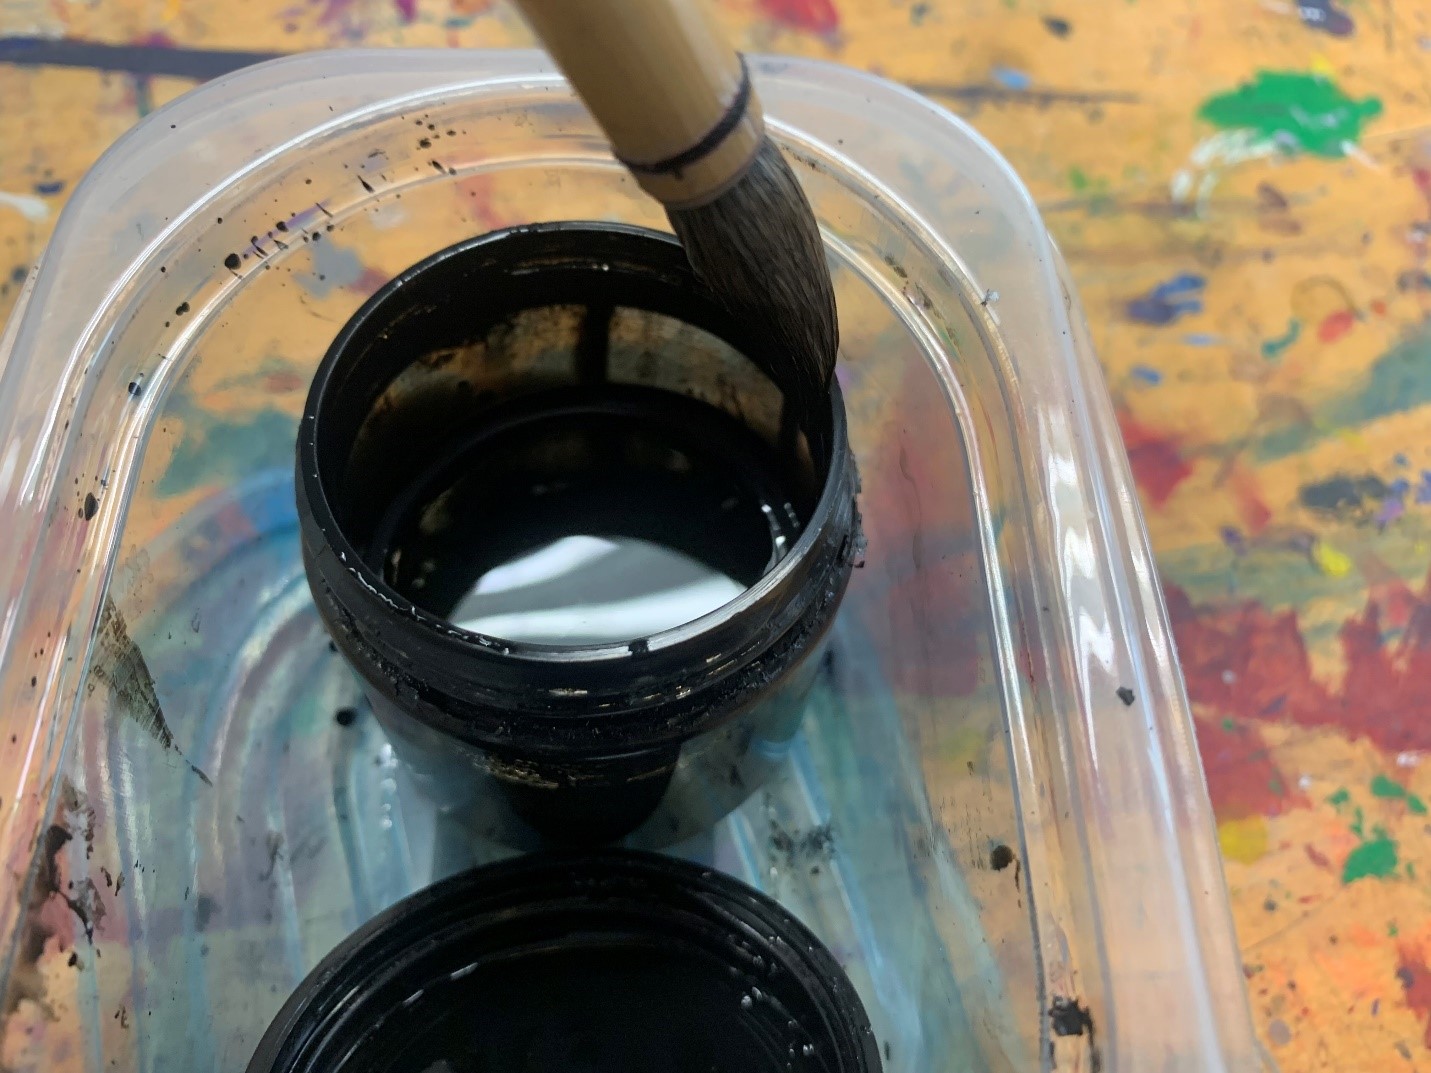 Calligraphy brush exiting the pot of ink by being brushed on the rim